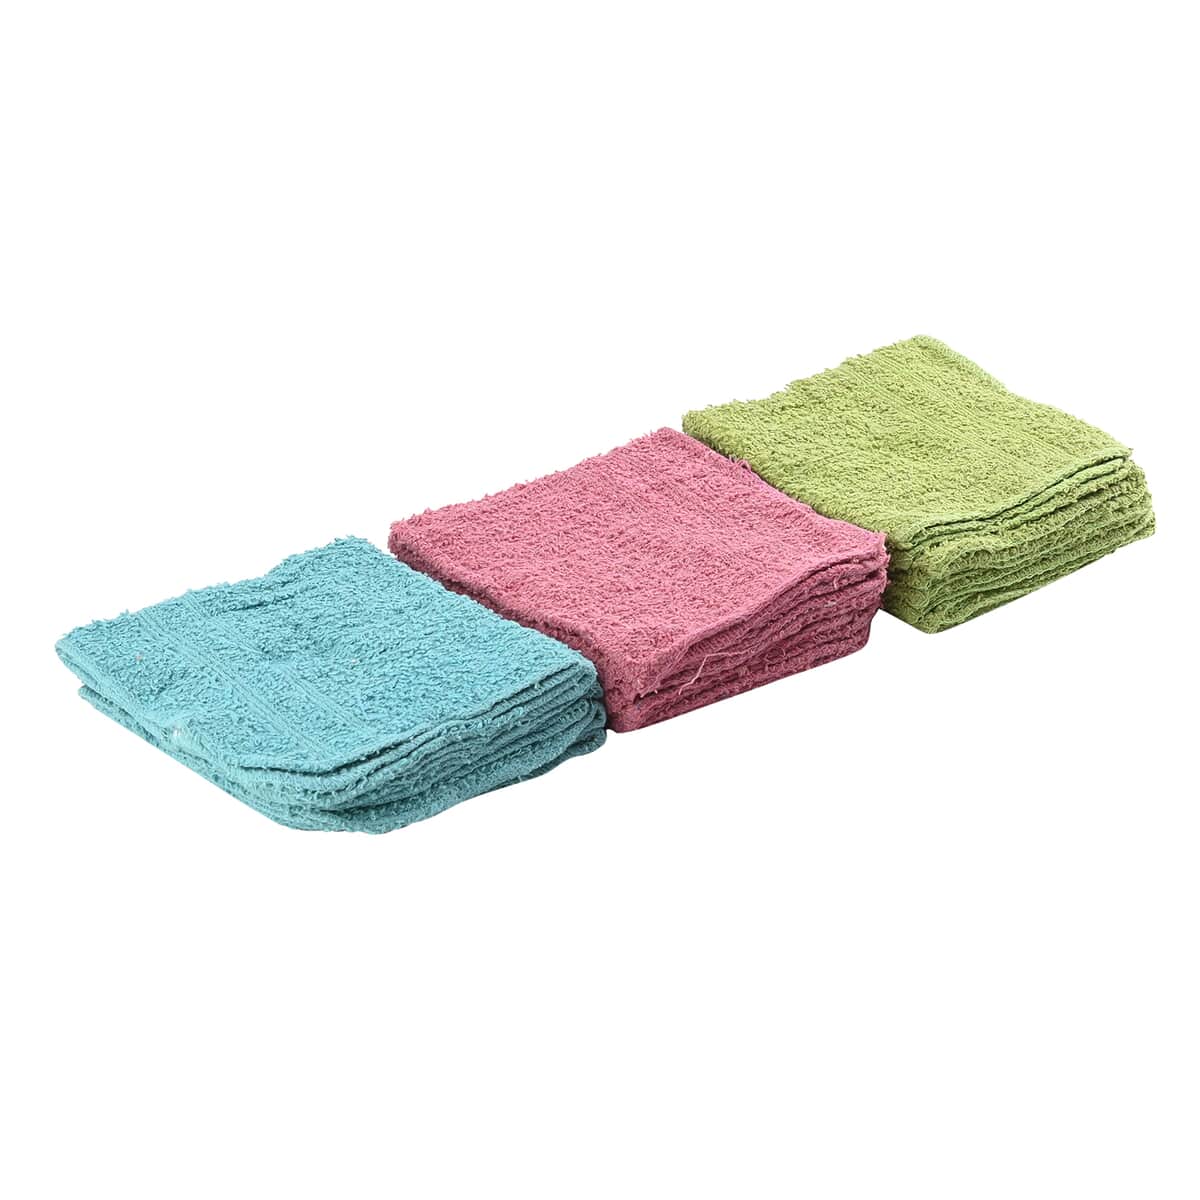 Northpoint Pack of 12 Wash Clothes in Blue, Pink, Green Color, Basic Cleaning Clothes, Washable And Reusable Wash Clothes image number 2